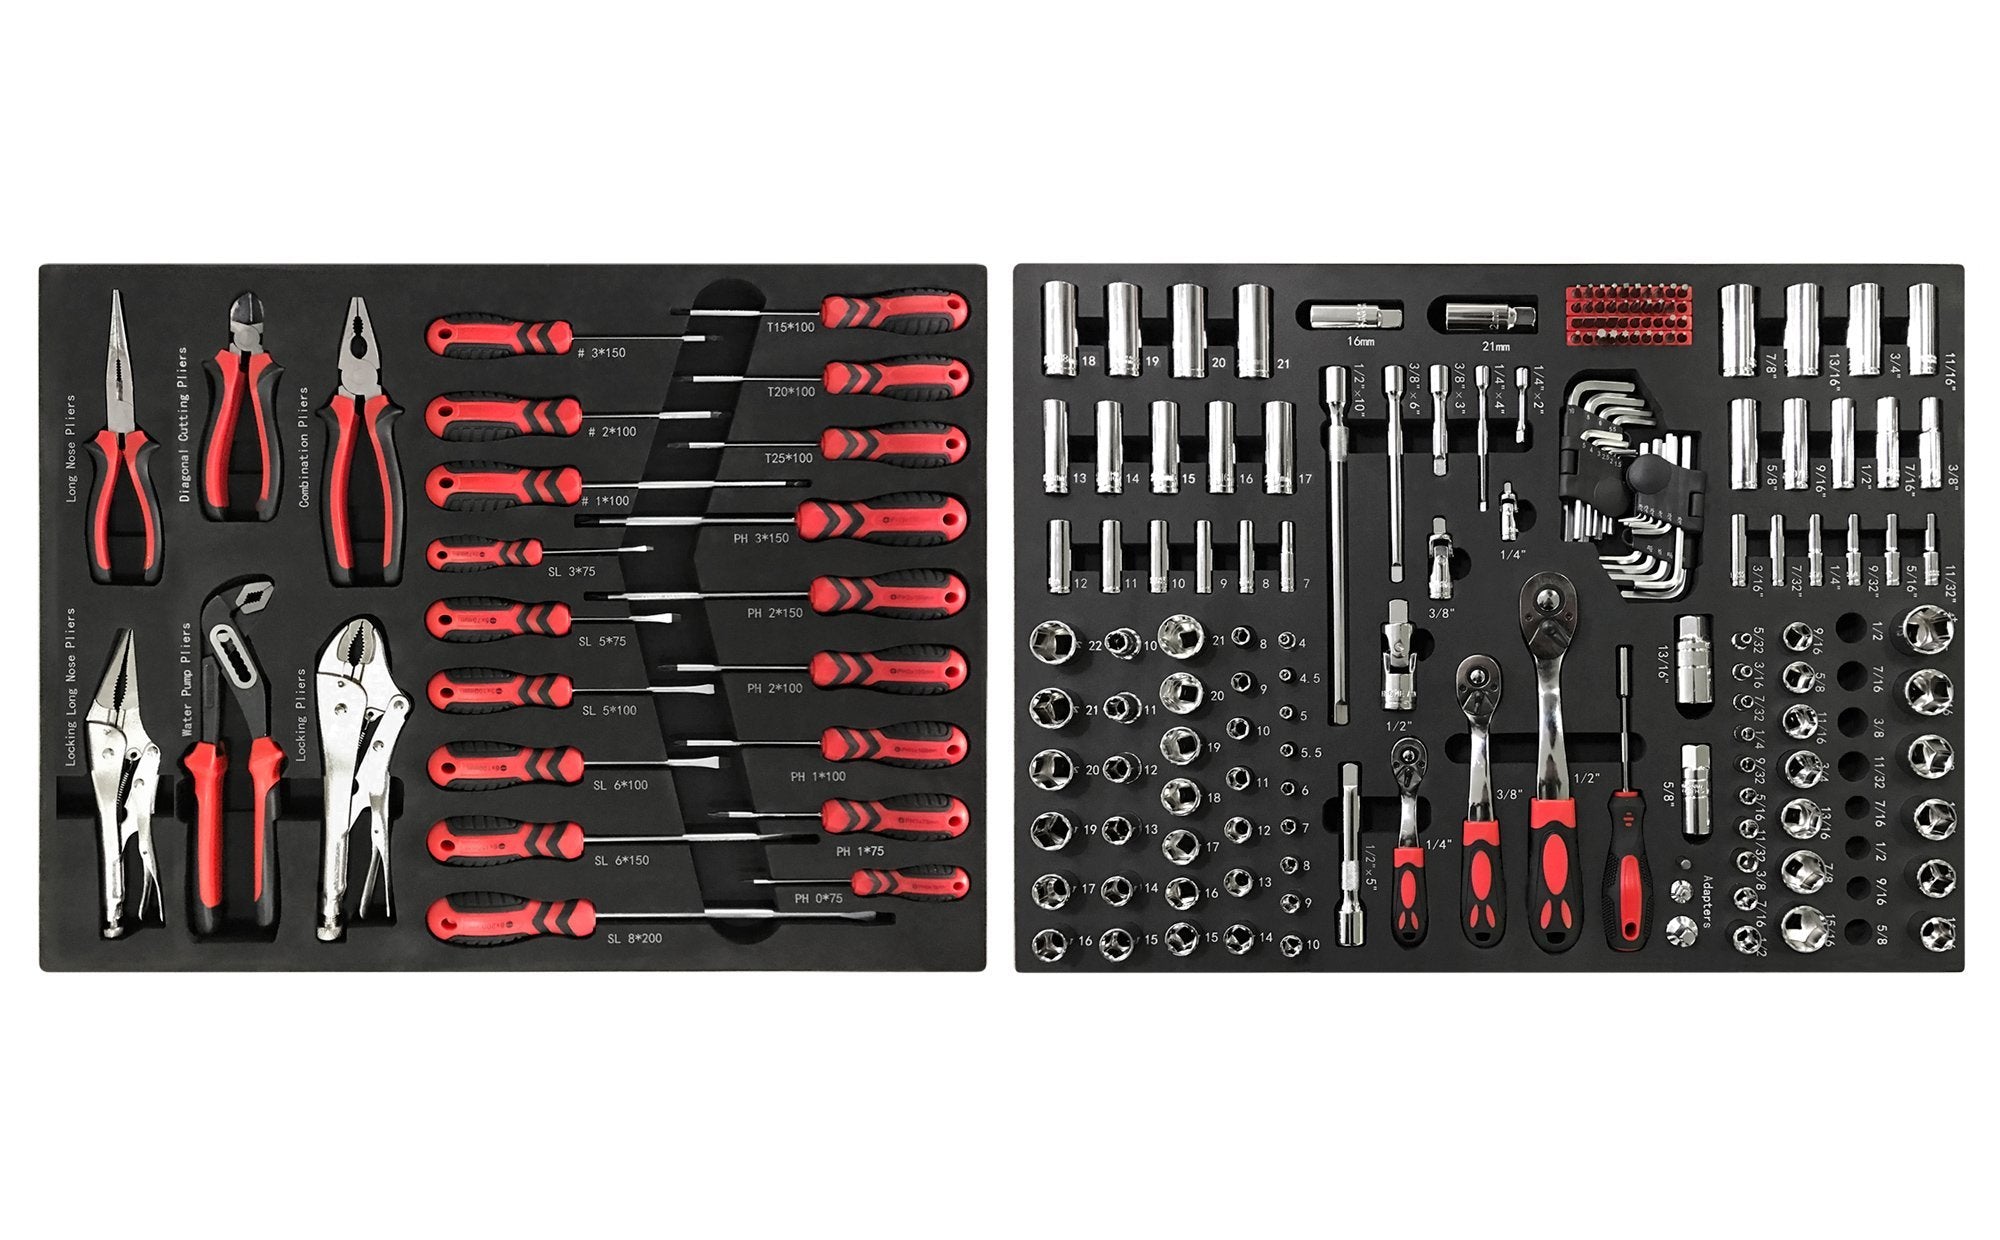 Pro 3.0/Performance Plus 2.0 Socket, Screwdriver and Plier Tray